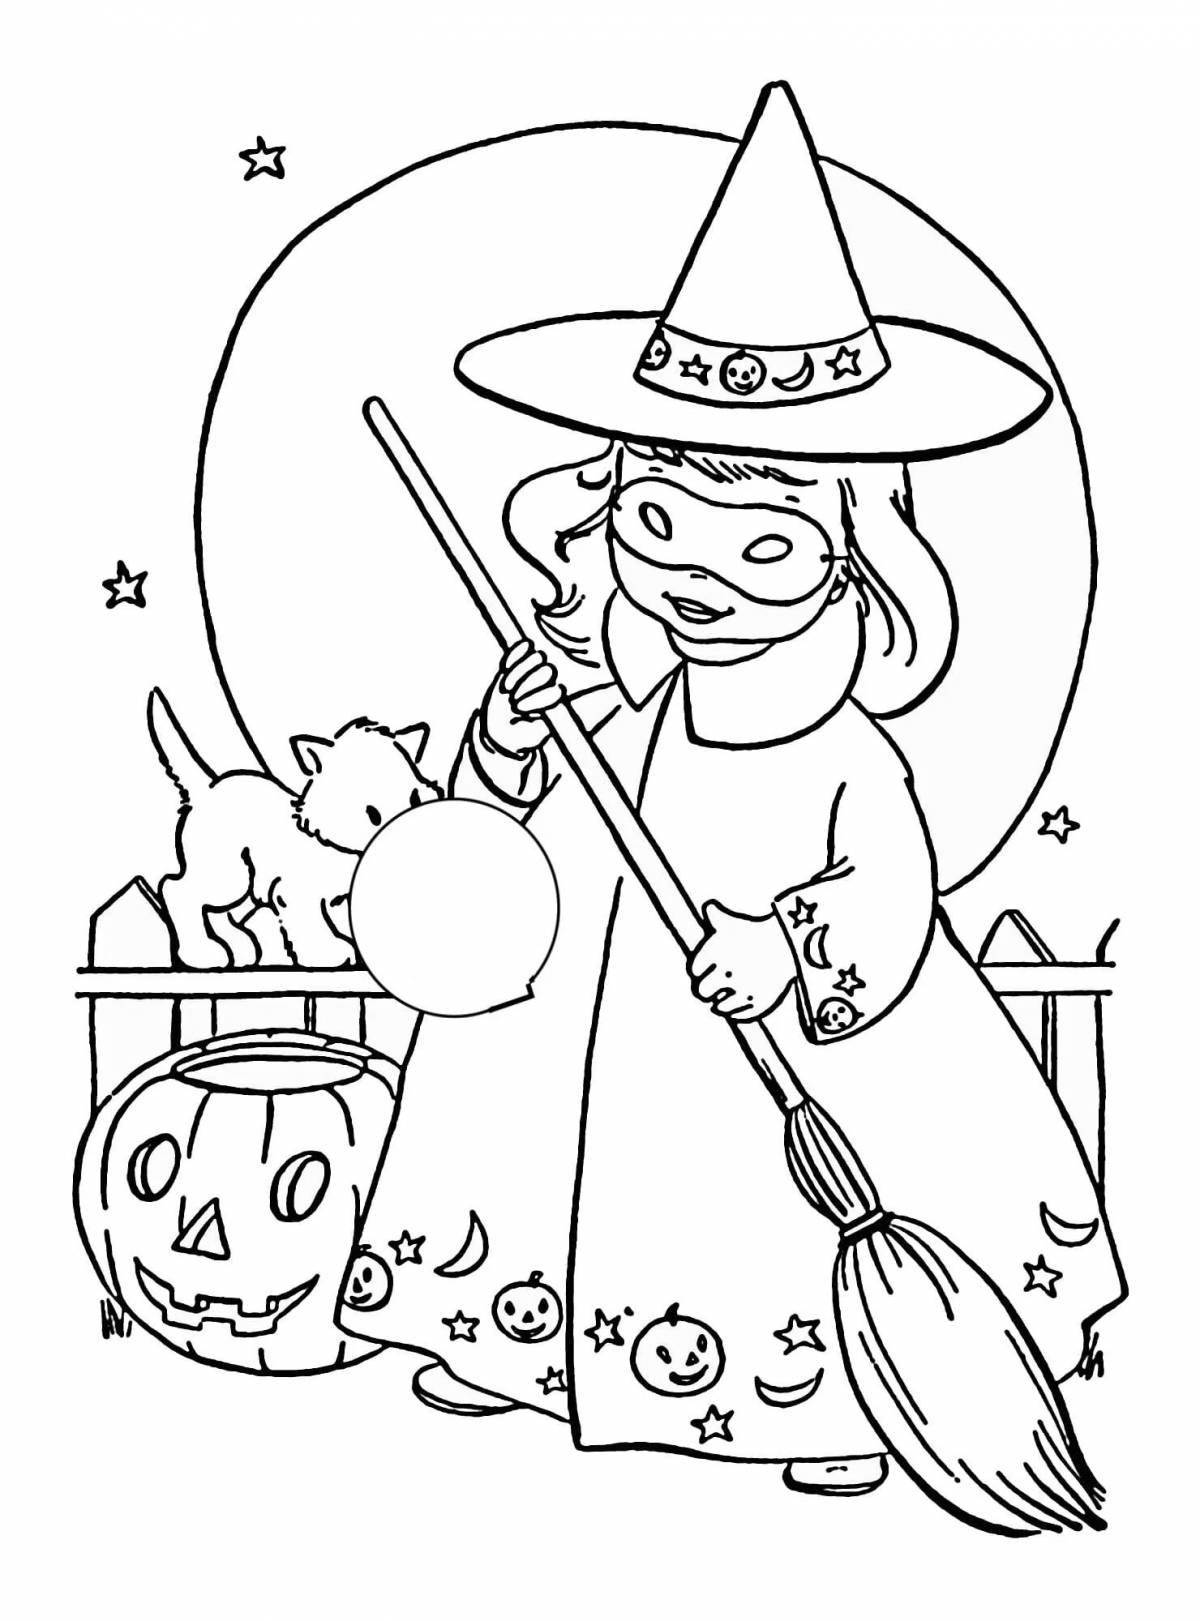 Bright little witch coloring book